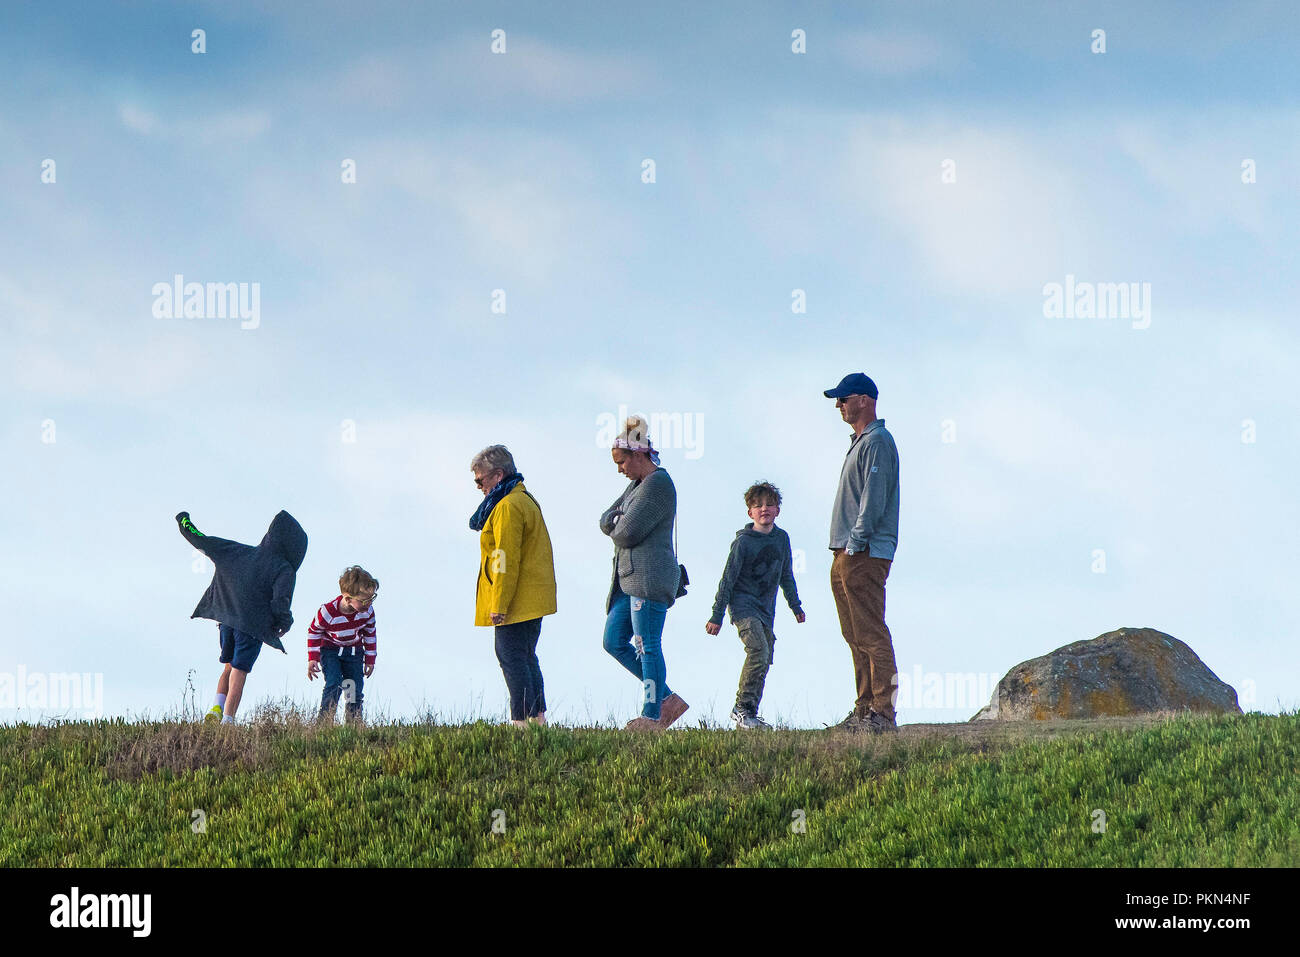 A family on a staycation holiday in Newquay Cornwall. Stock Photo